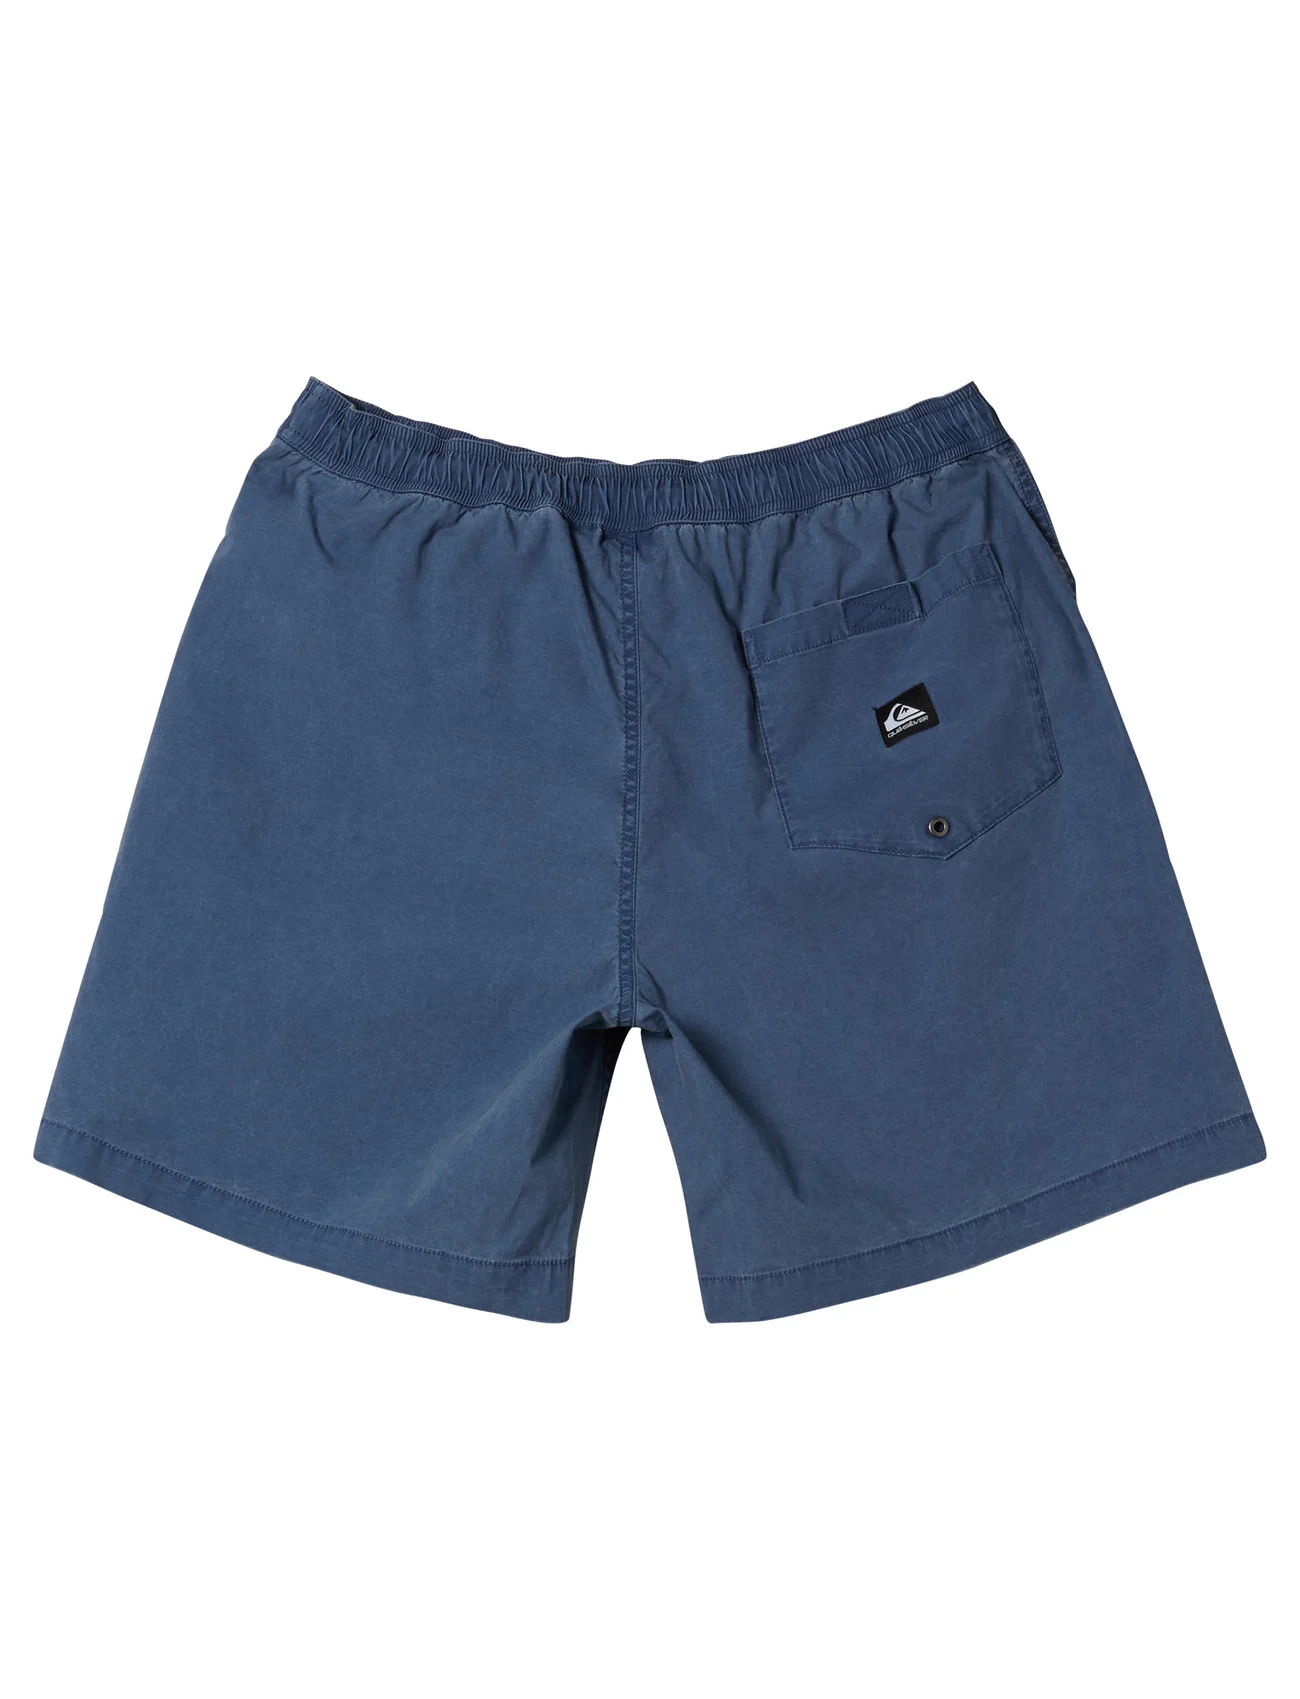 Quiksilver - TAXER - treningsshorts - crown blue - 1